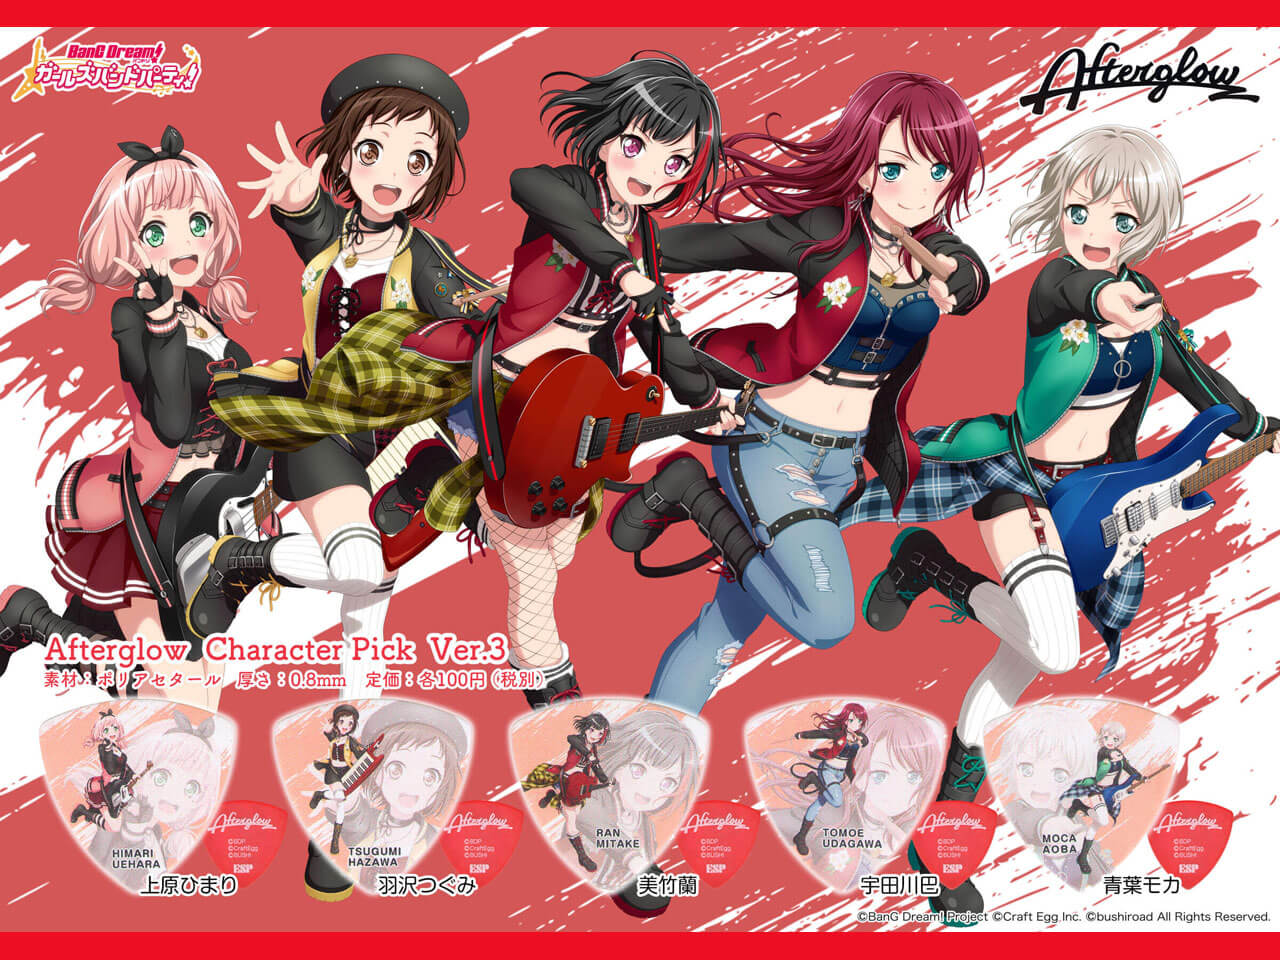 【ESP×BanG Dream!コラボピック】Afterglow Character Pick Ver.3 "美竹蘭"（GBP RAN AFTERGLOW 3）＆”ハメパチ” セット